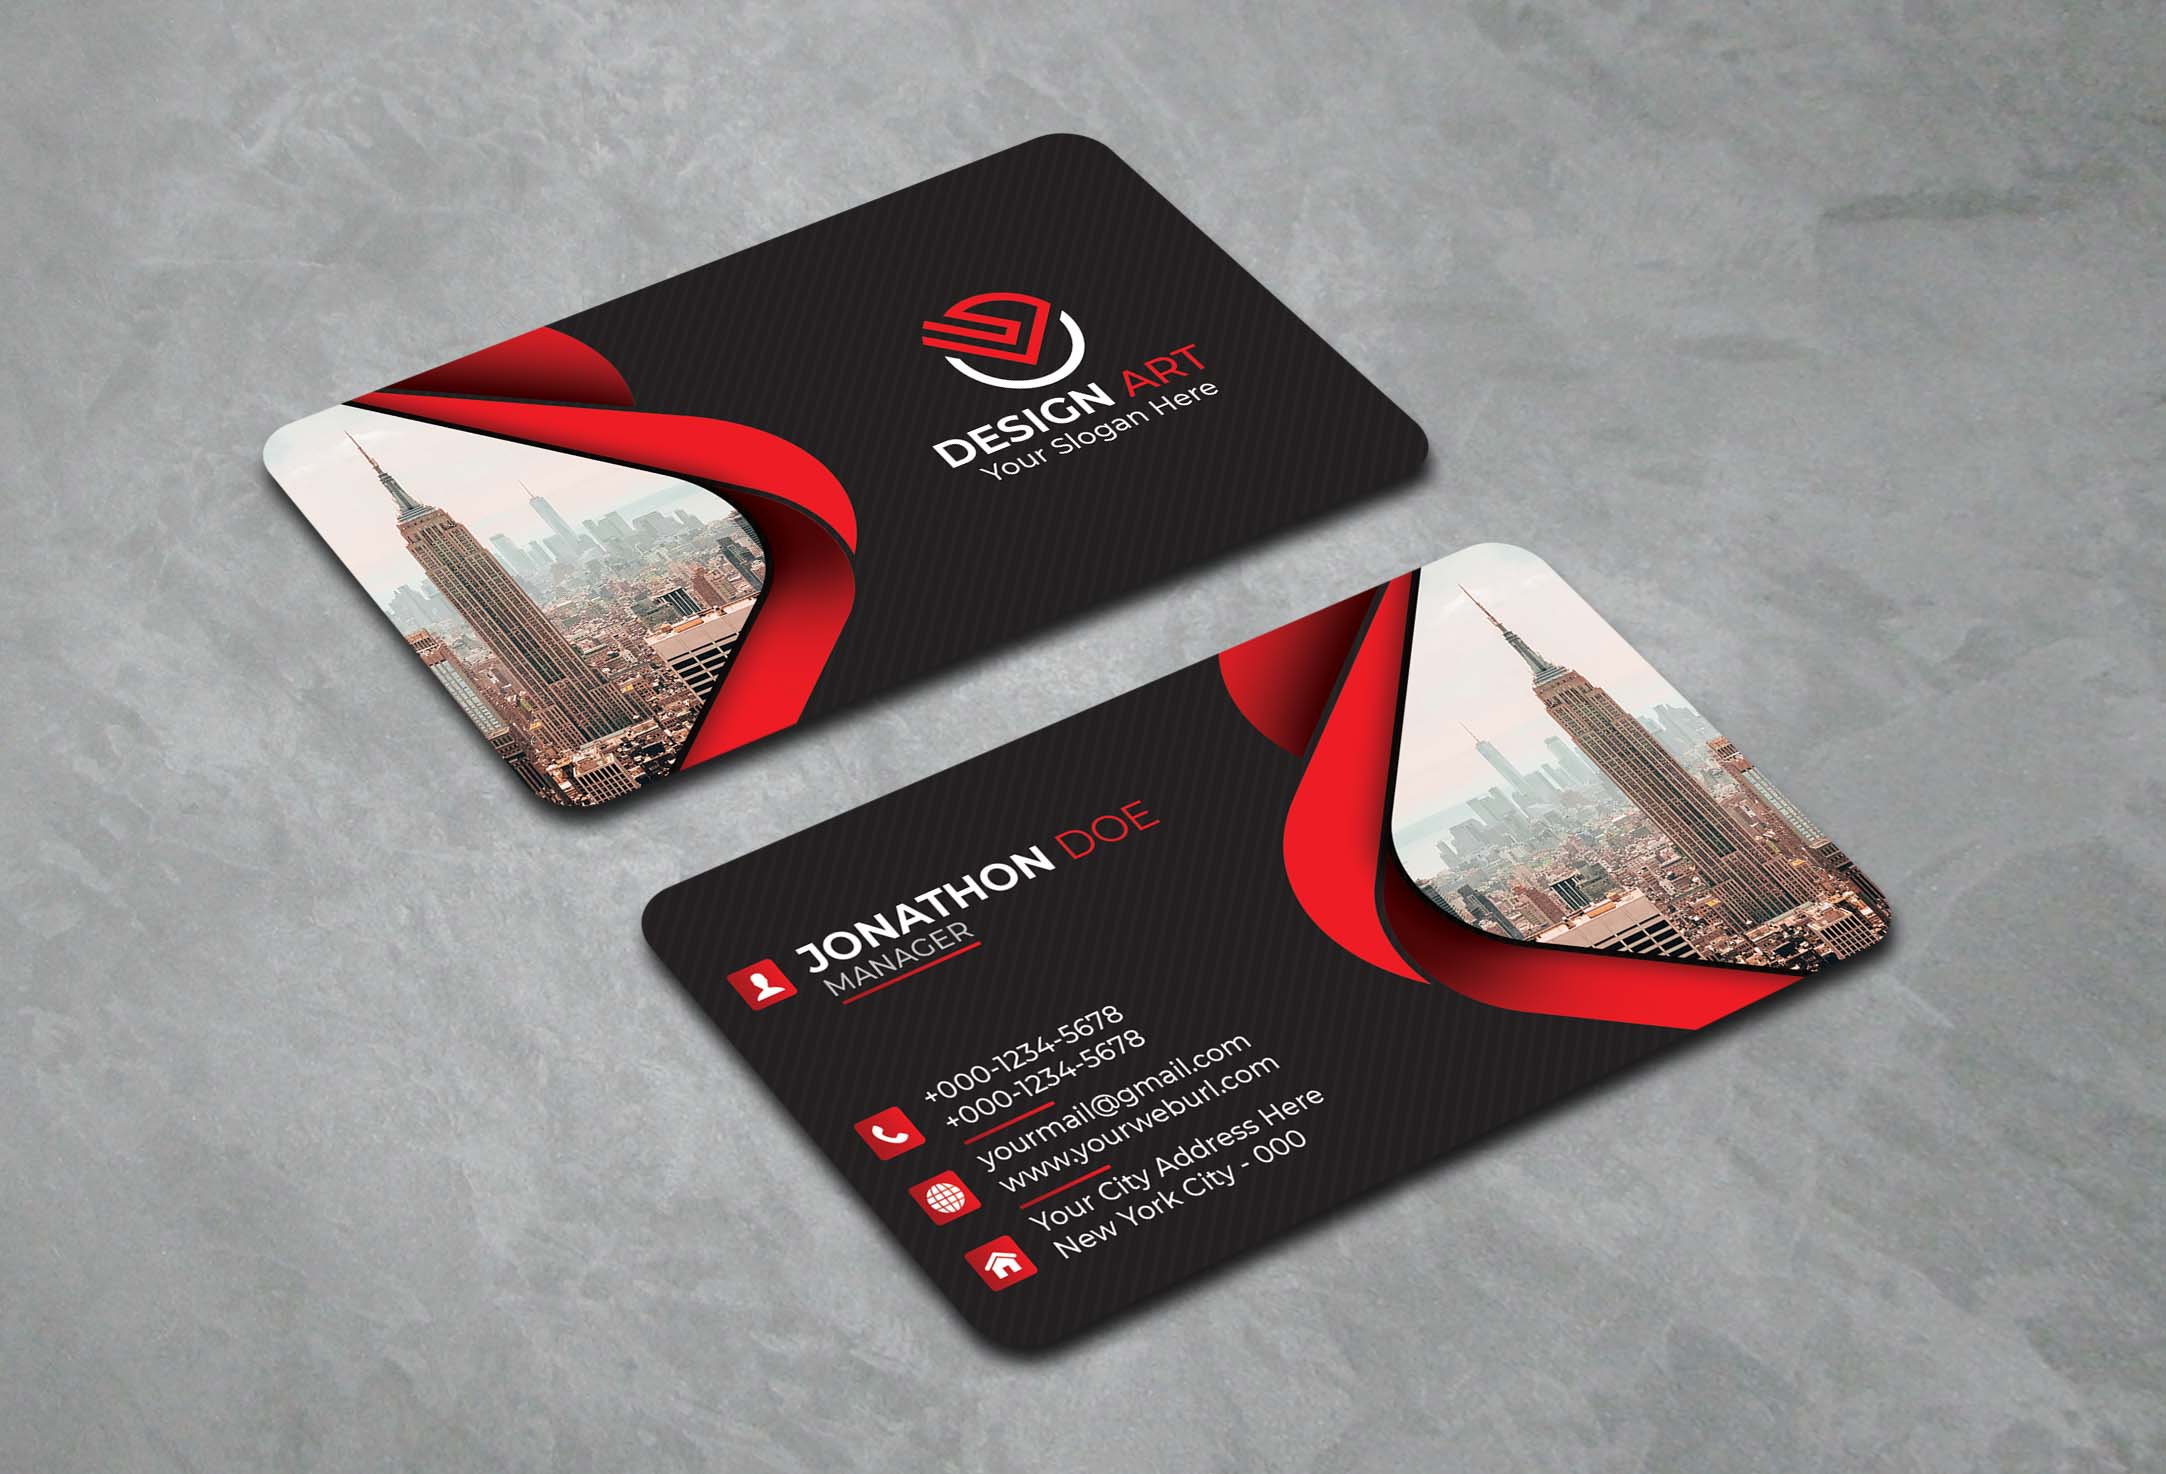 Two business cards with a red and black design.